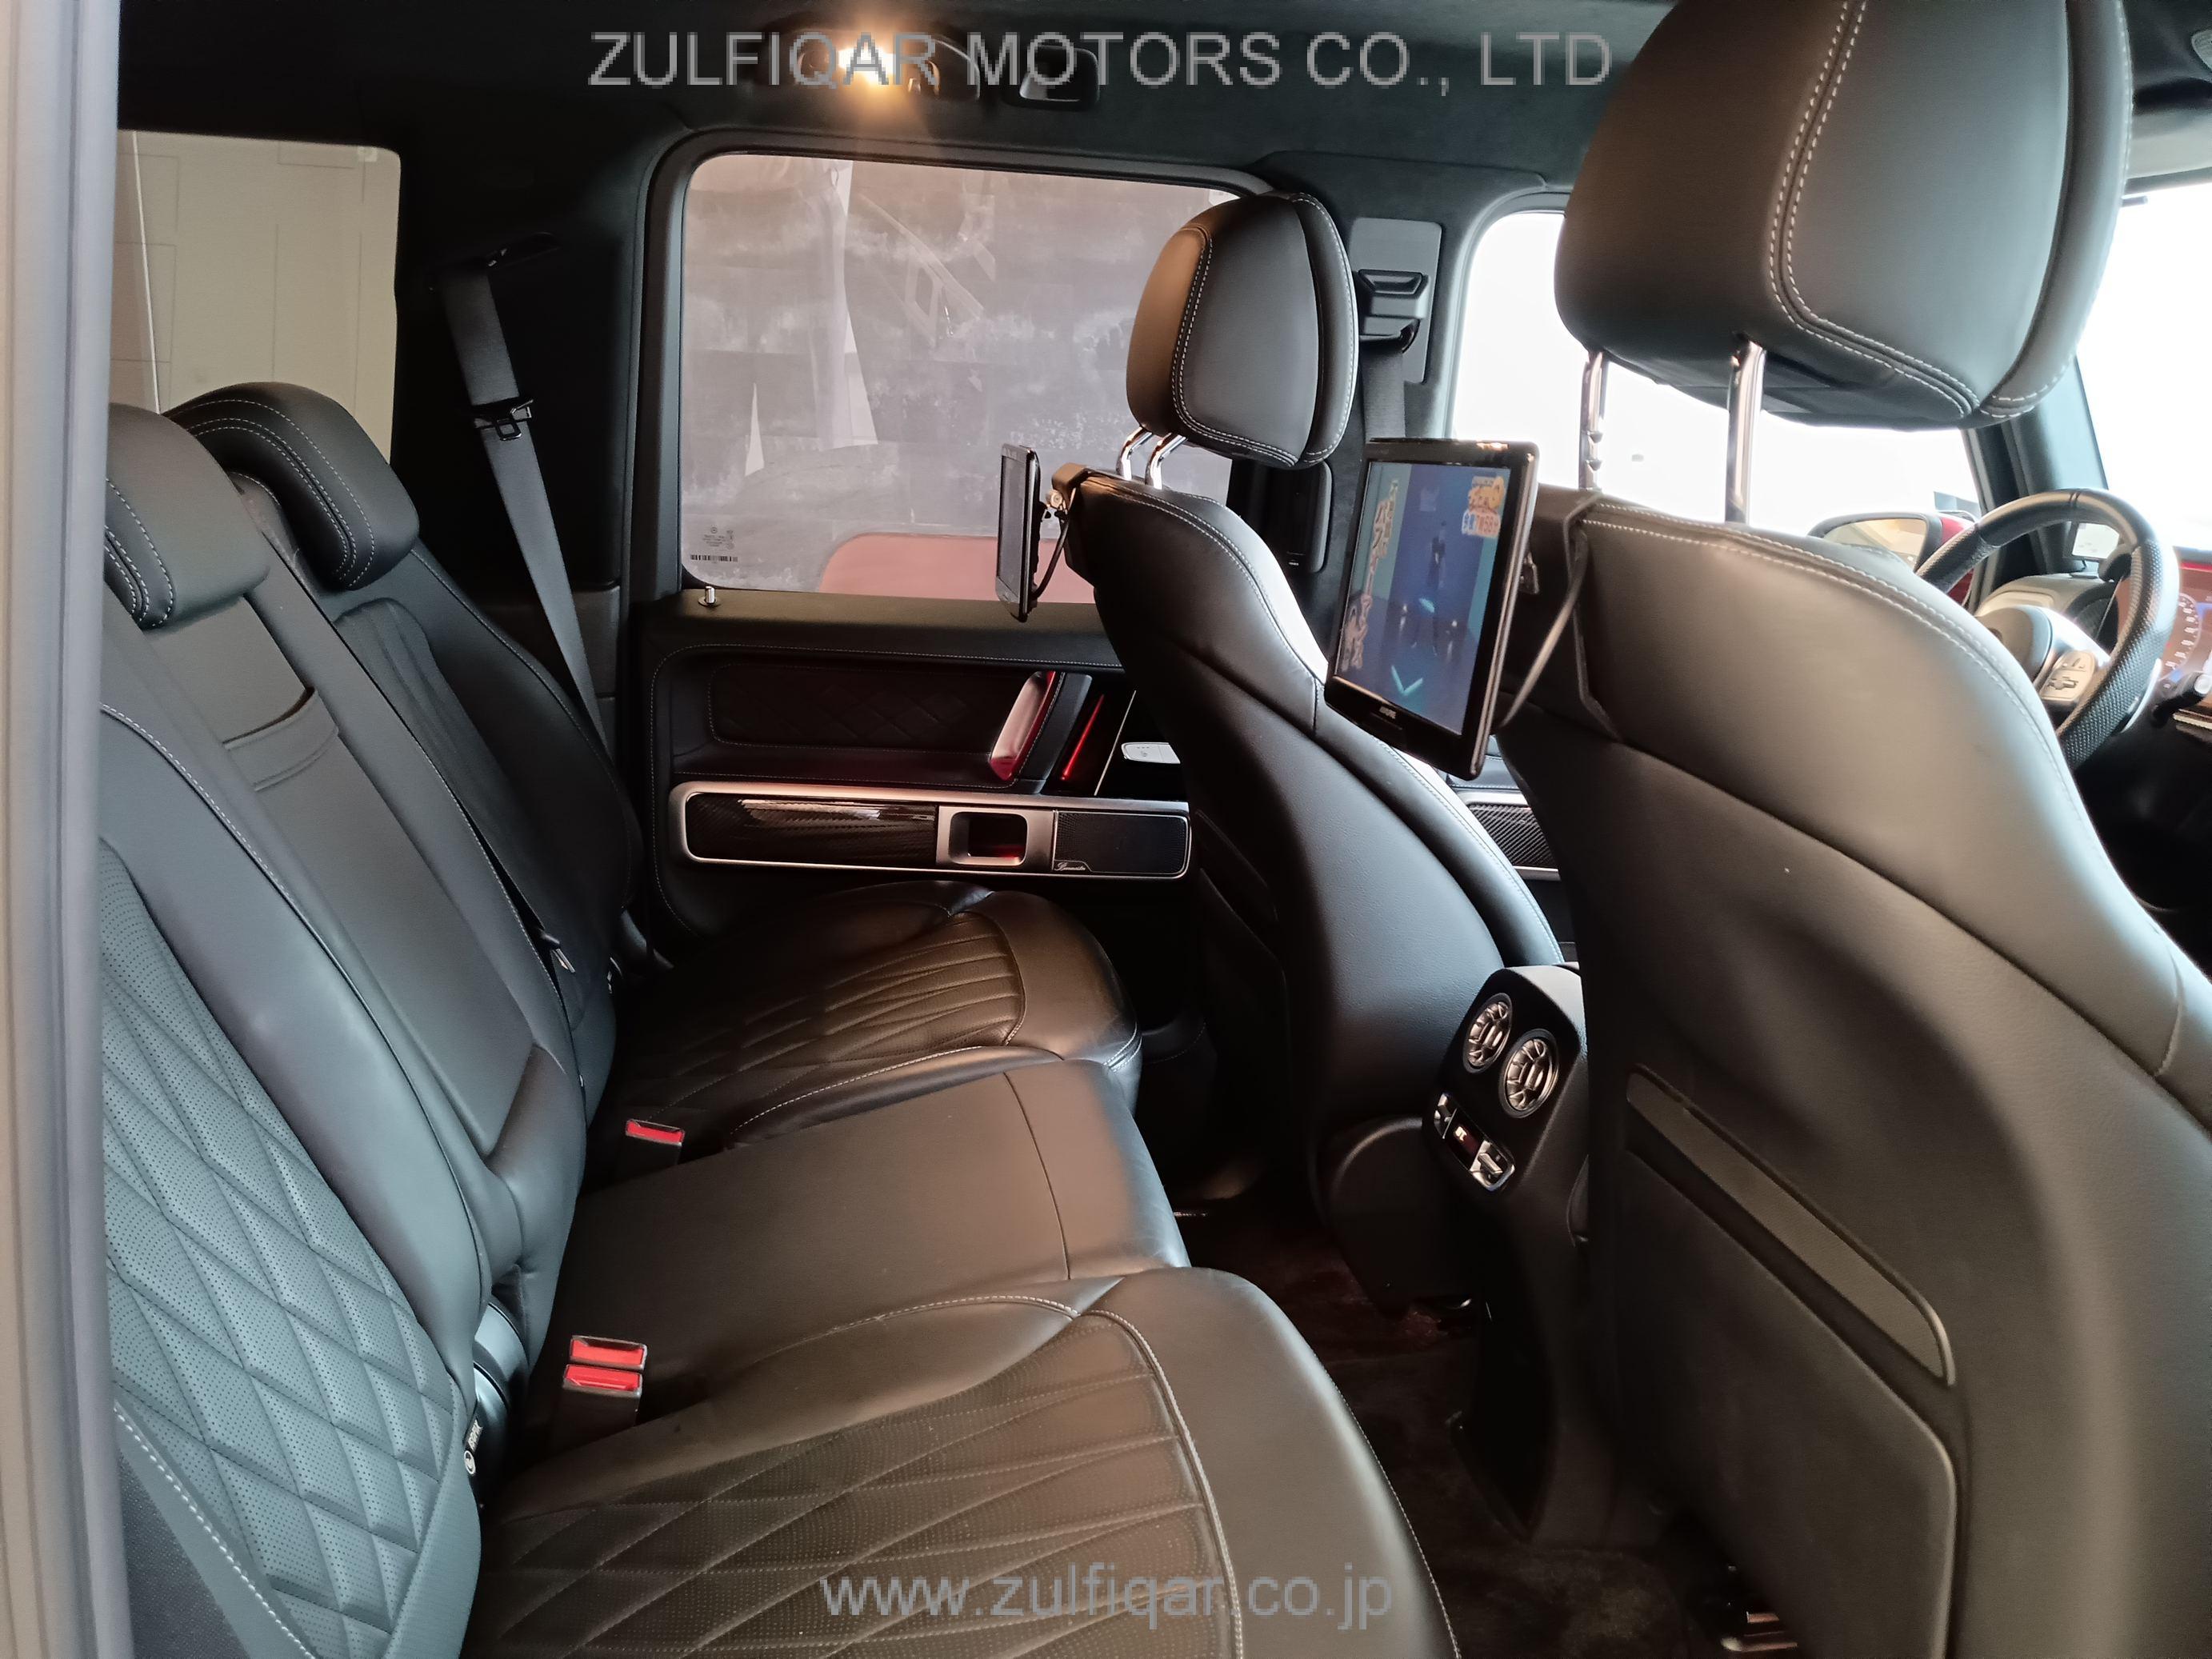 MERCEDES AMG G CLASS 2019 Image 59